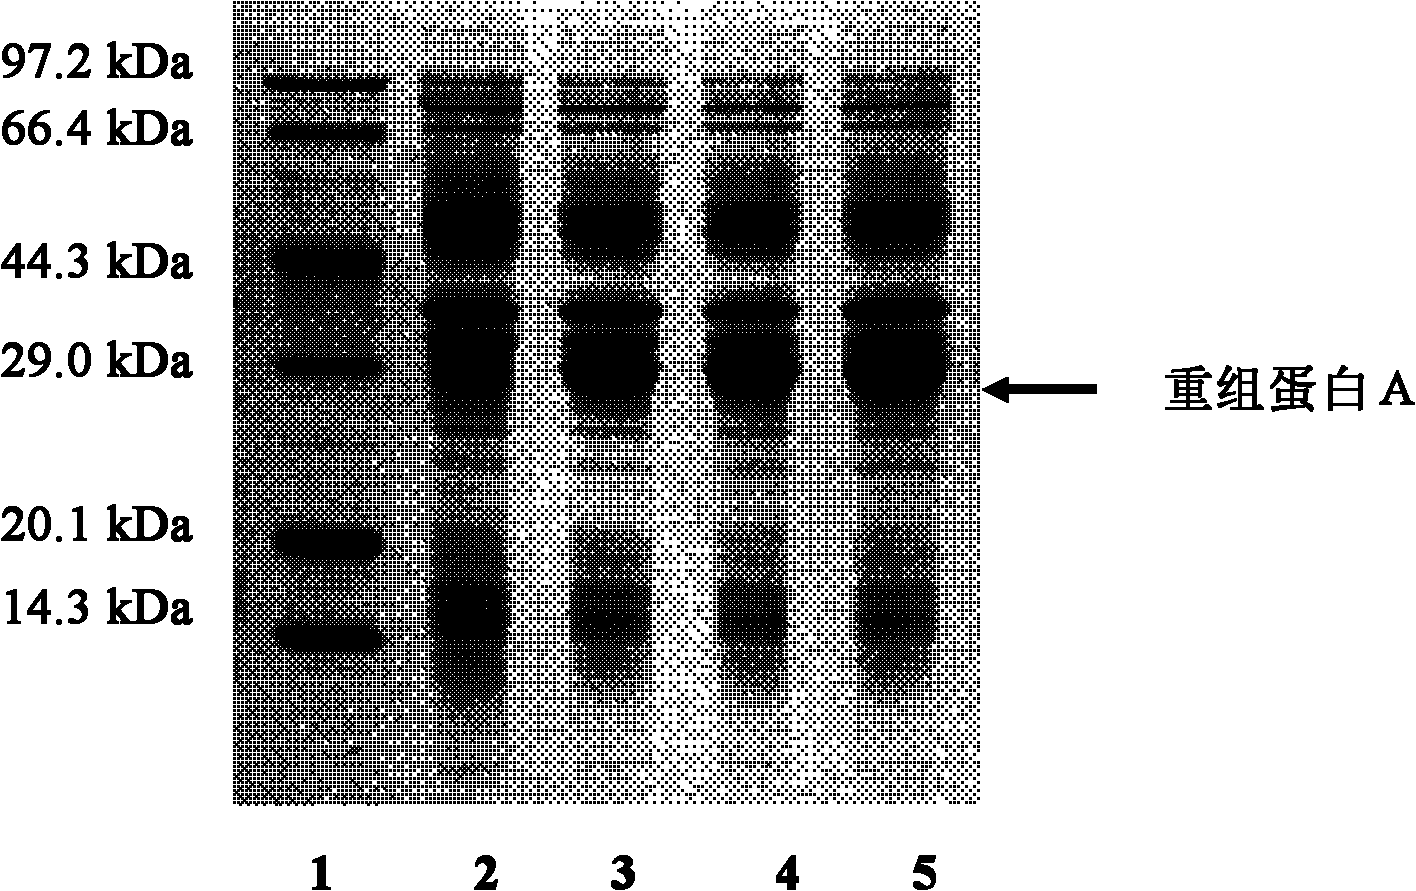 Method for producing recombinant protein A